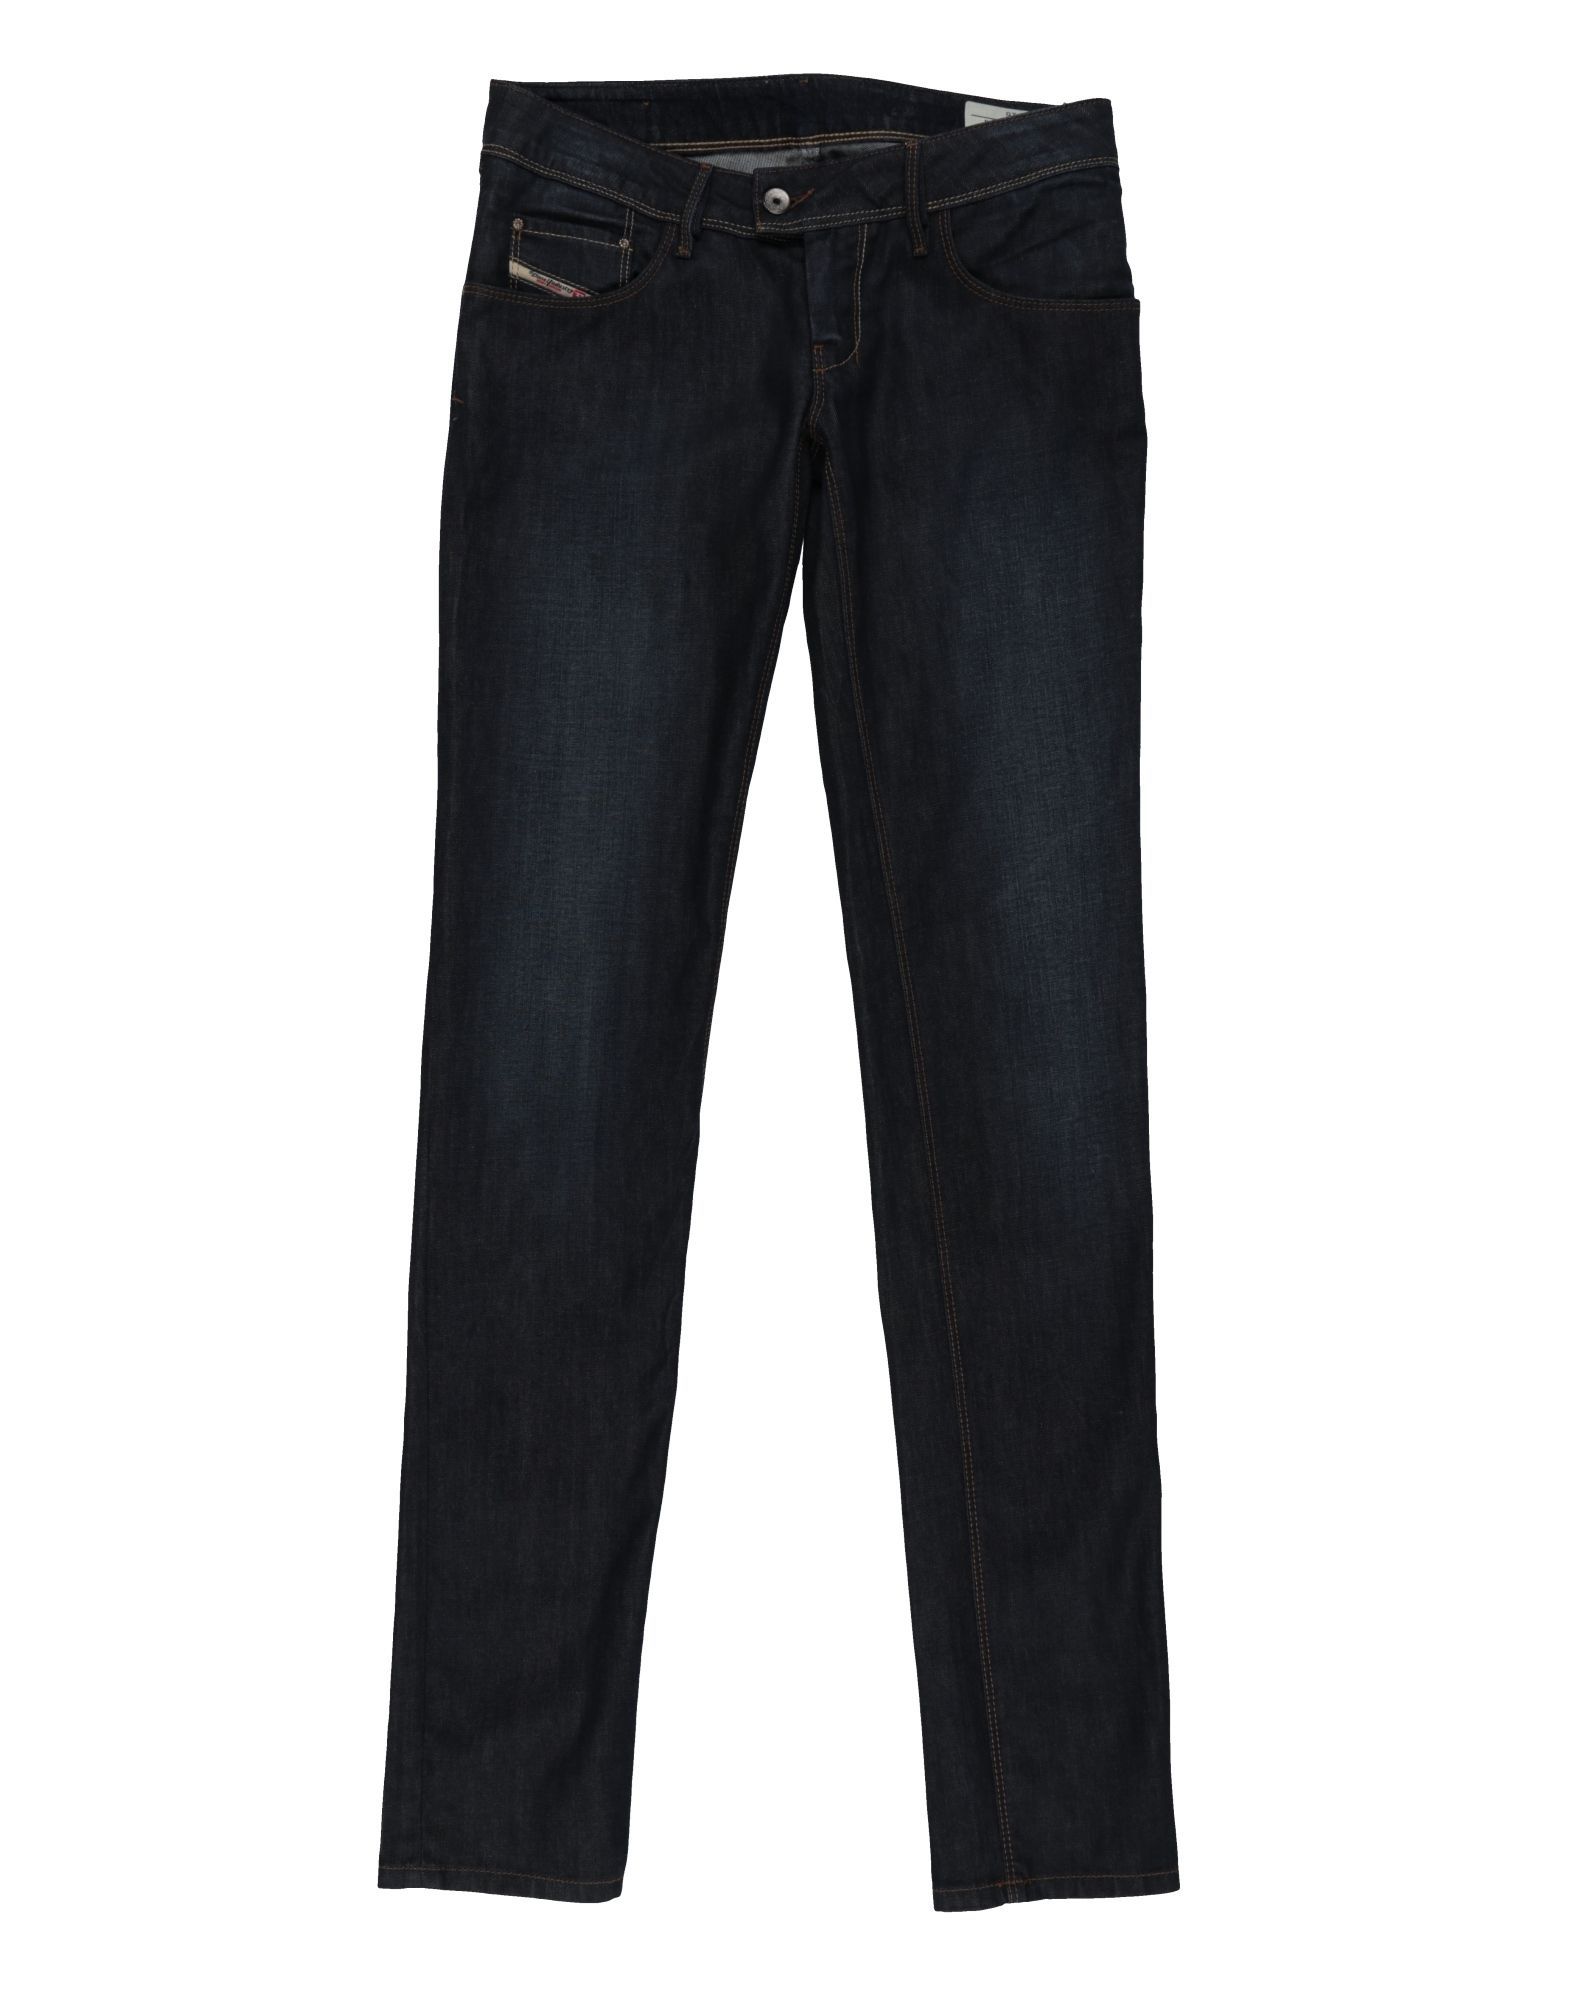 model: nevy j, denim, faded, logo, solid colour, dark wash, mid rise, front closure, button, zip, multipockets, wash at 30� c, do not dry clean, do not iron, do not bleach, do not tumble dry, stretch, straight-leg pants